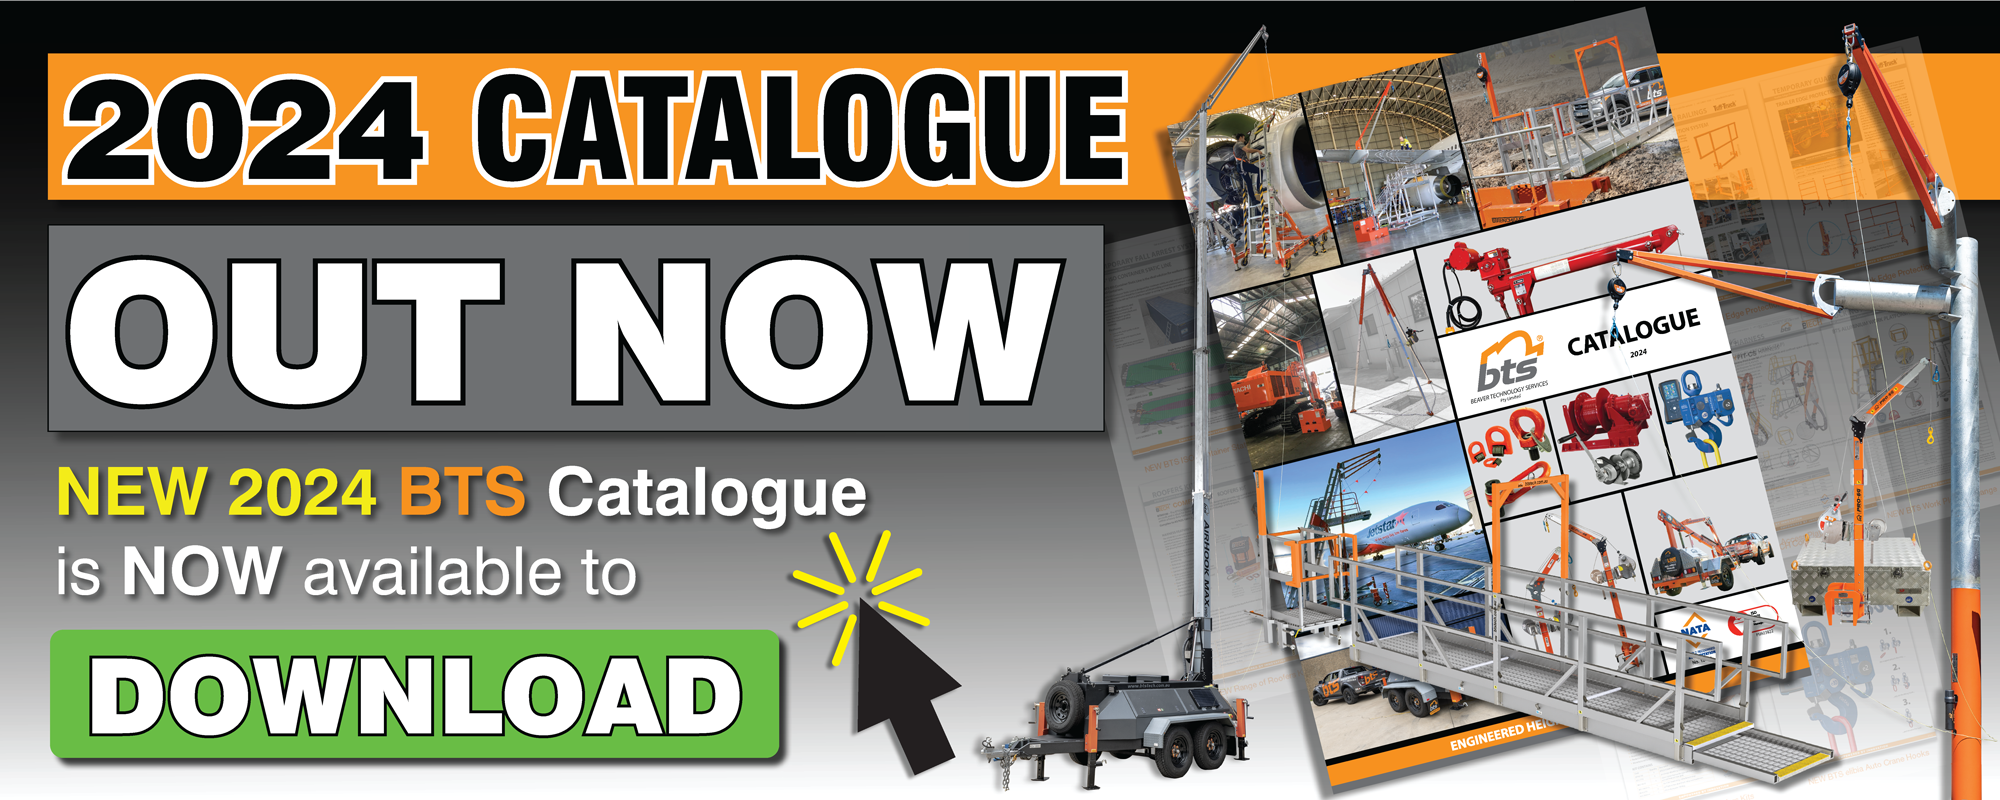 2024 Catalogue Download Banner